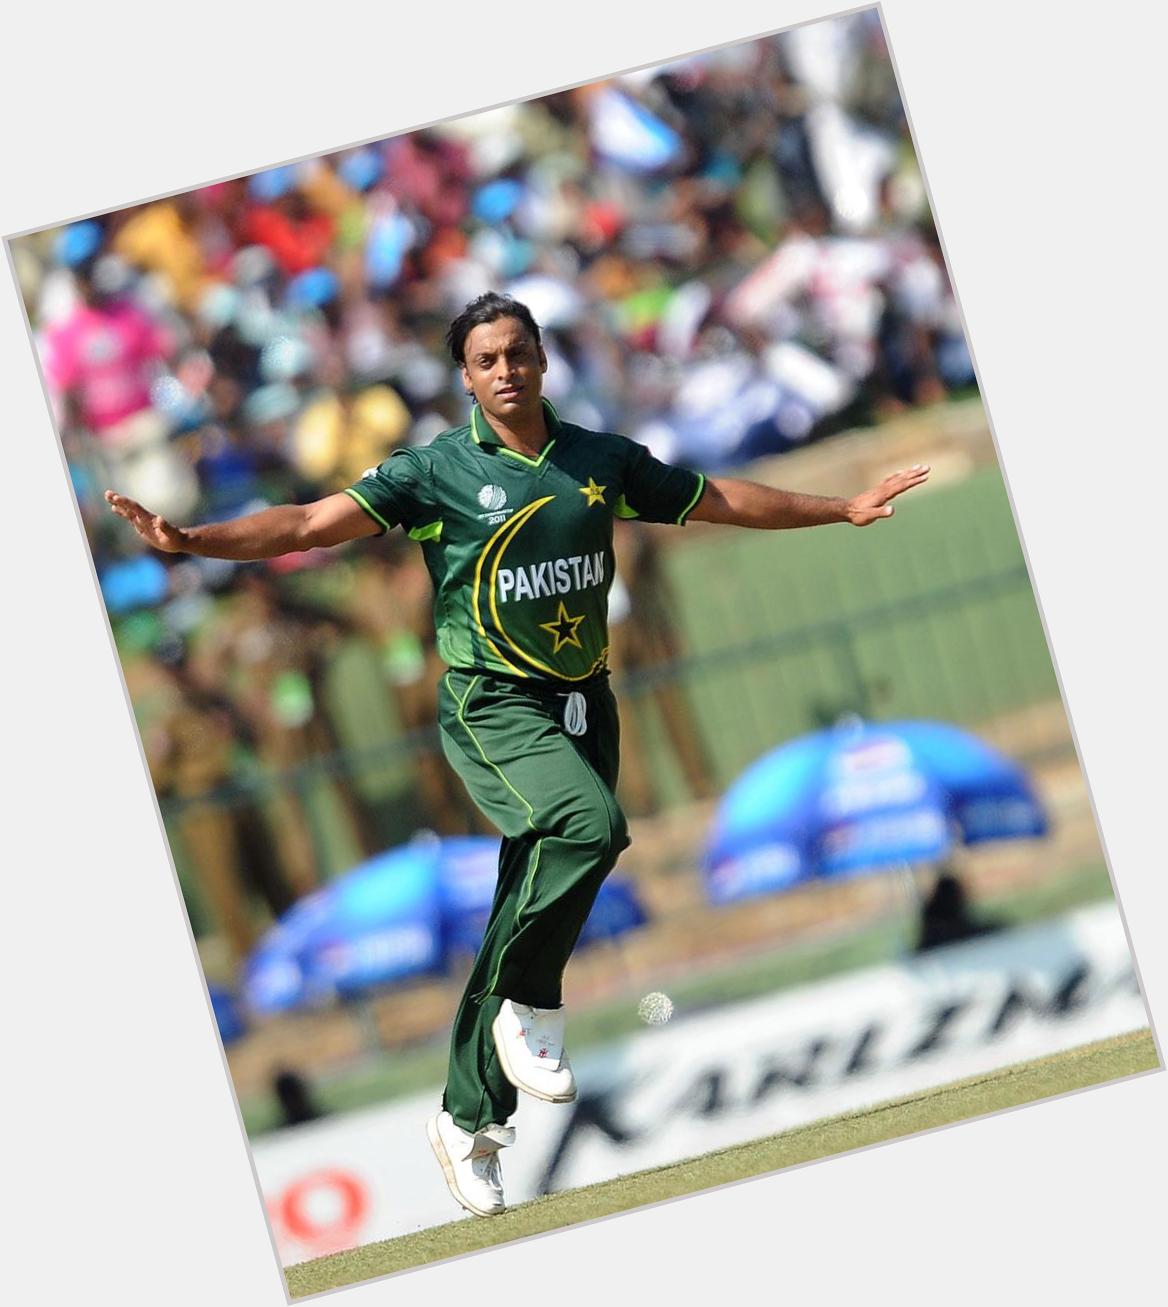 A very happy birthday to one of the fastest bowlers that Cricket has ever seen- Shoaib Akhtar! 